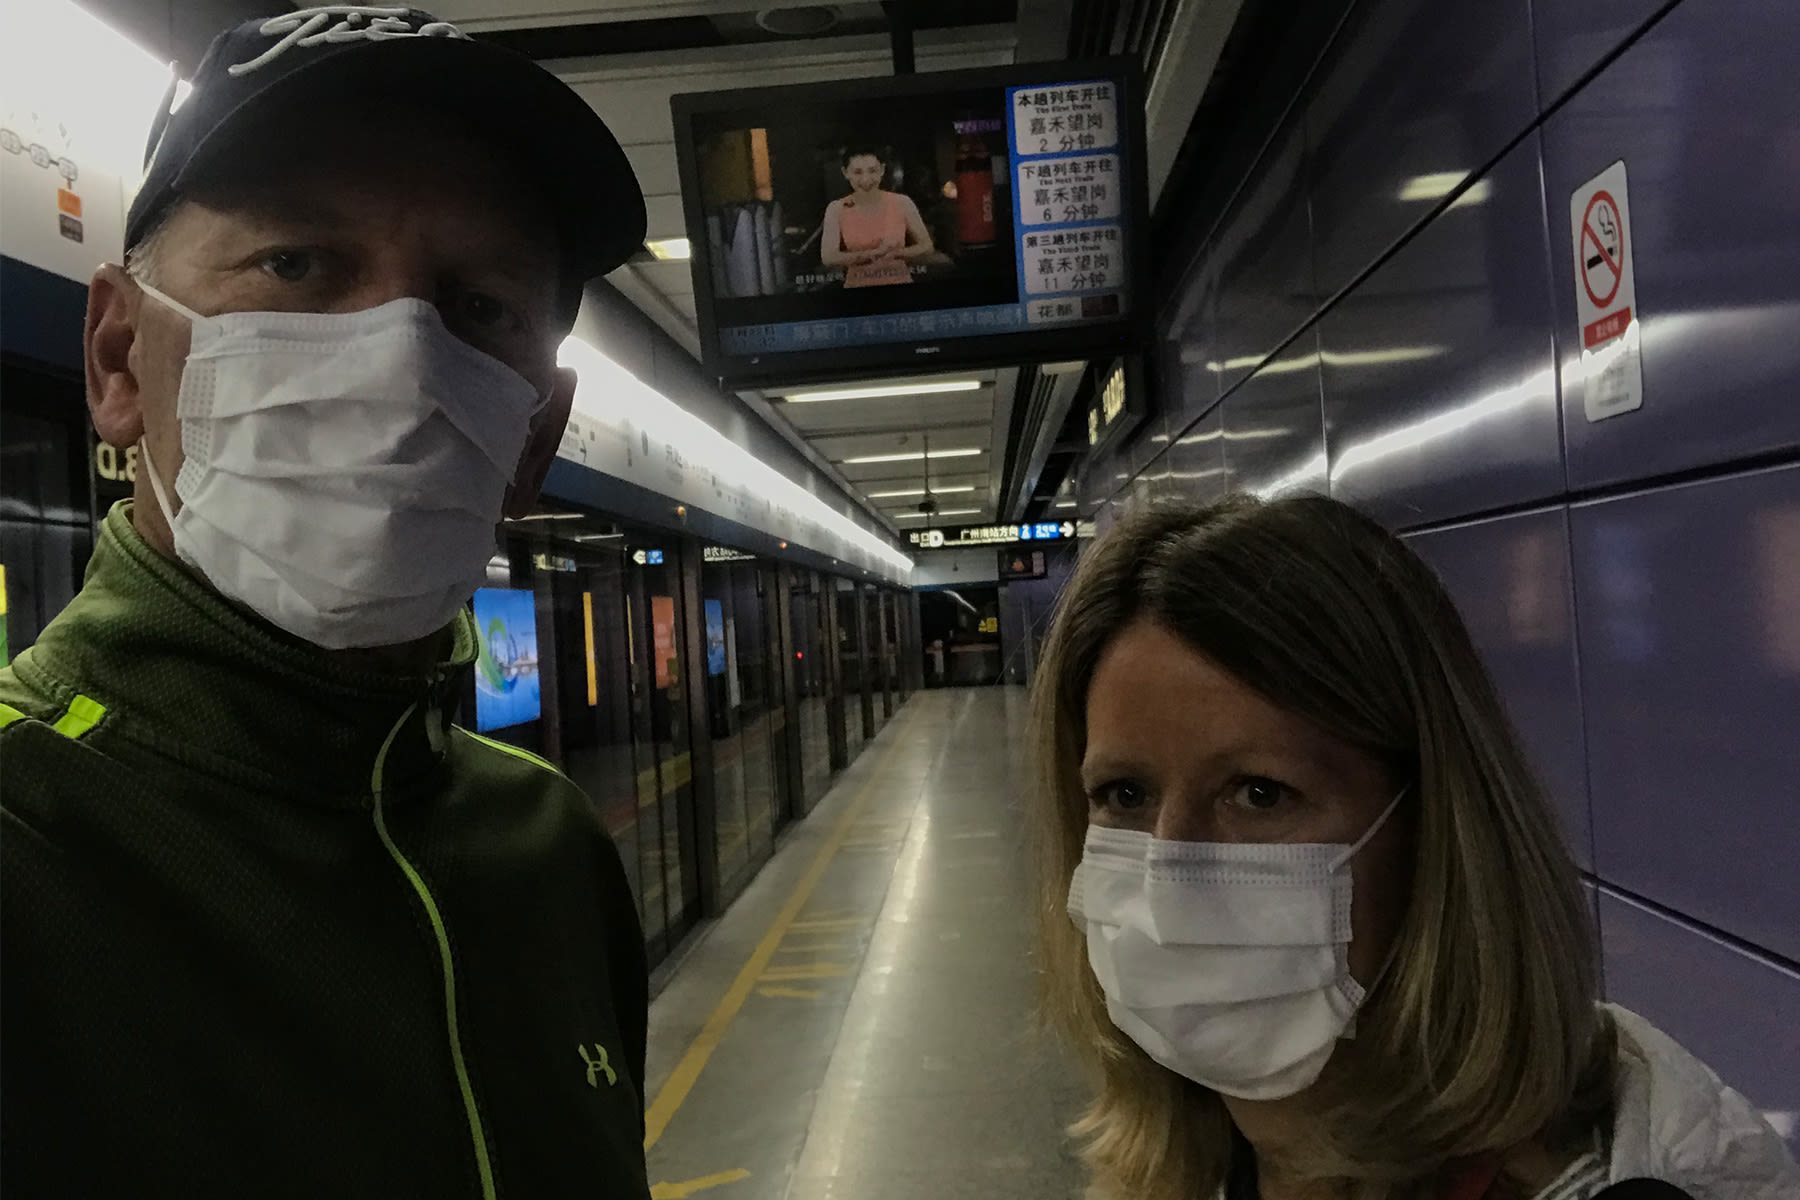 Doug and Karla Rohrbaugh wearing surgical masks in a train station in Guangzhou, China - Jan. 23, as they left for Thailand